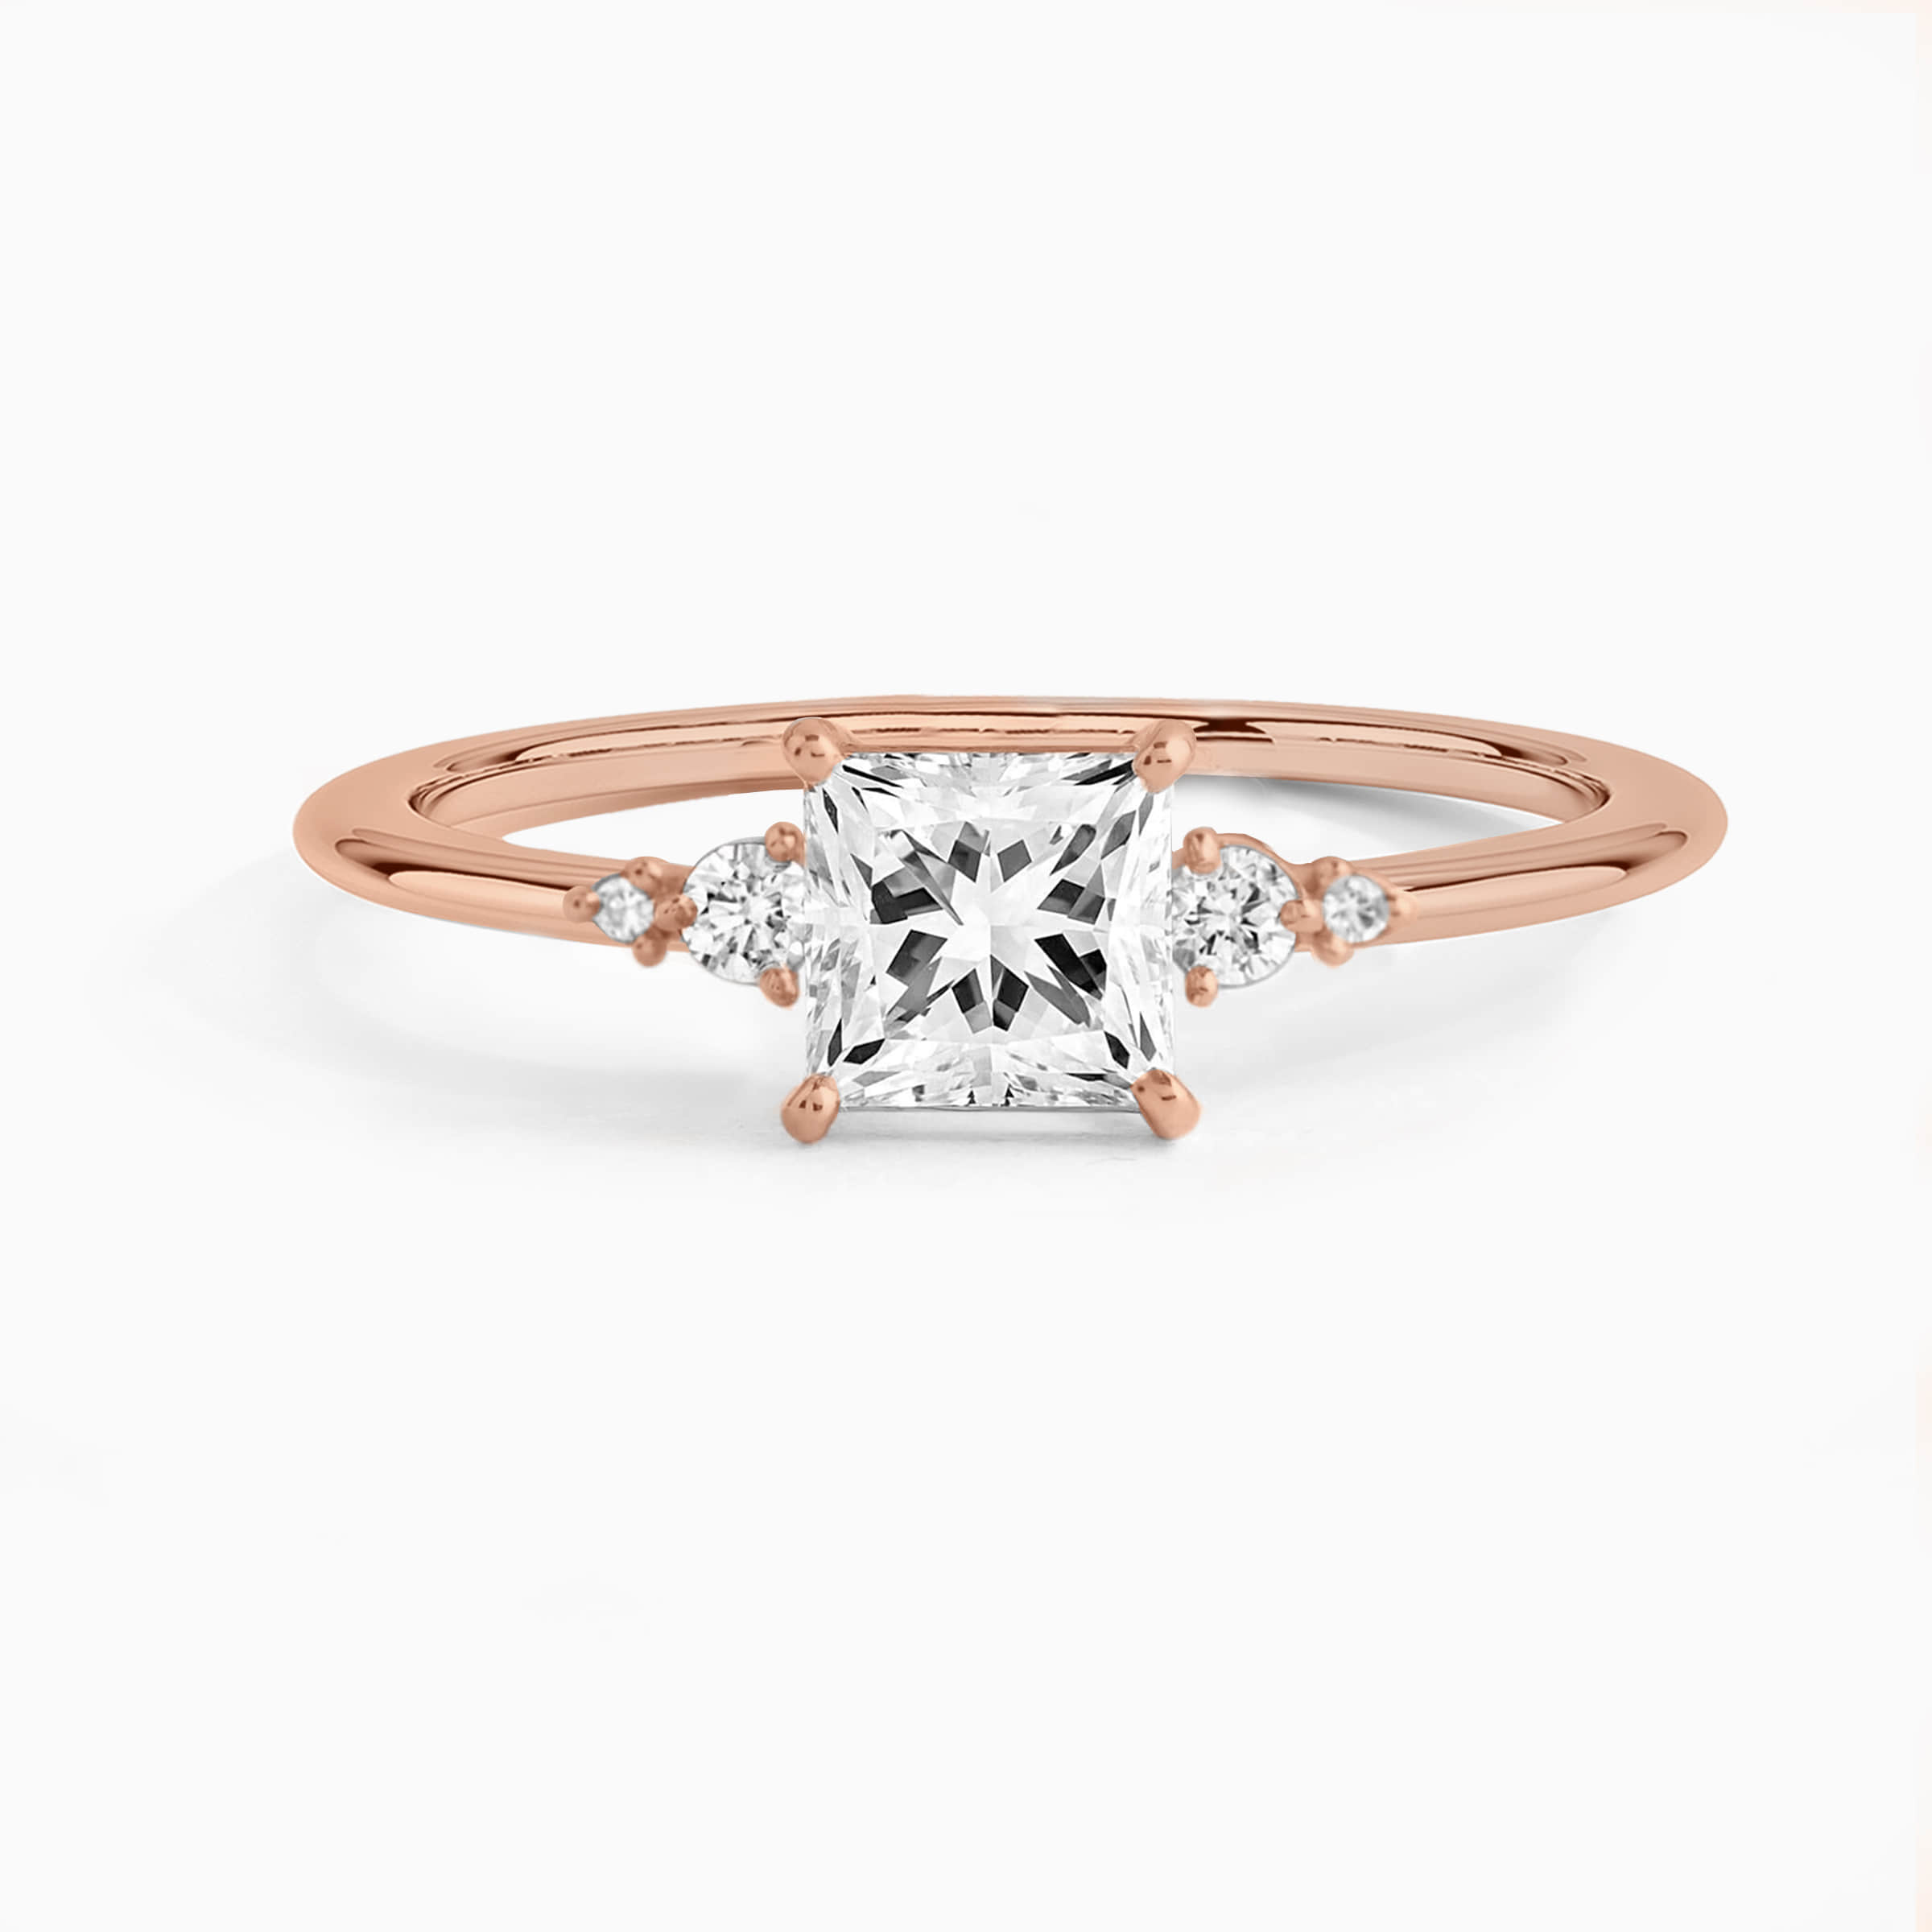 Darry Ring princess cut engagement ring in rose gold